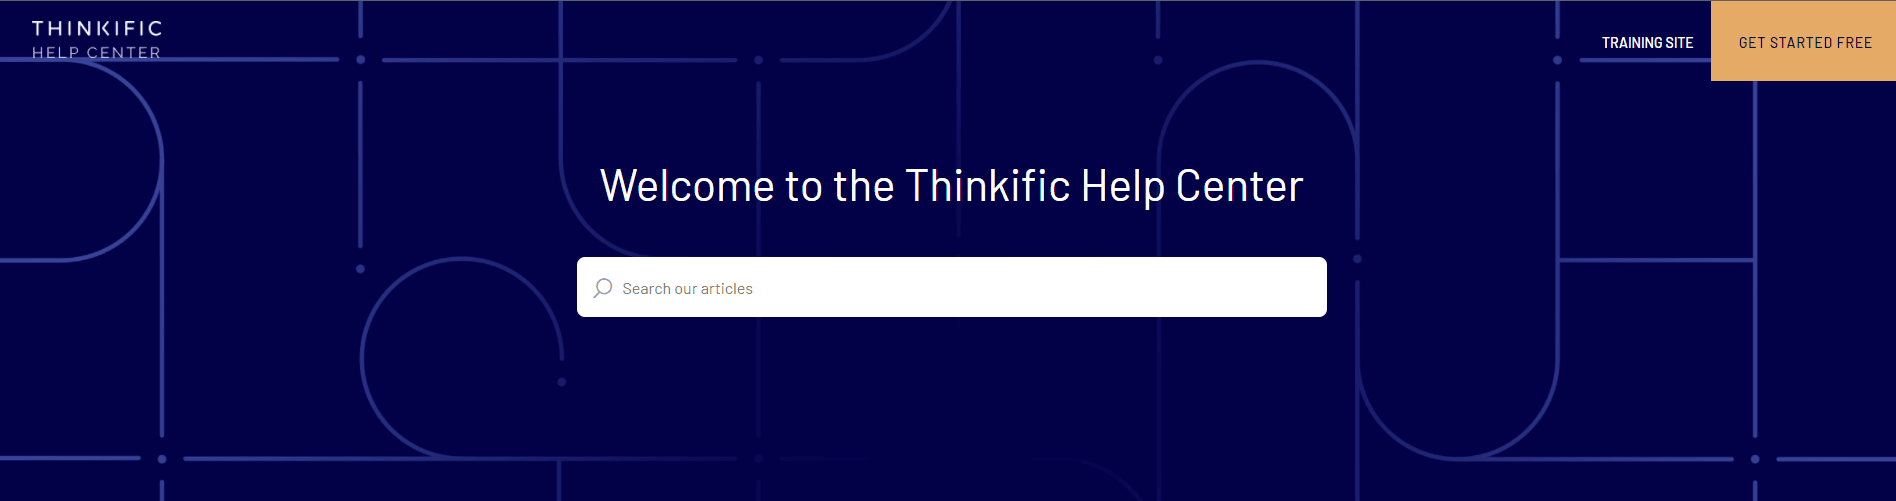 Thinkific Support